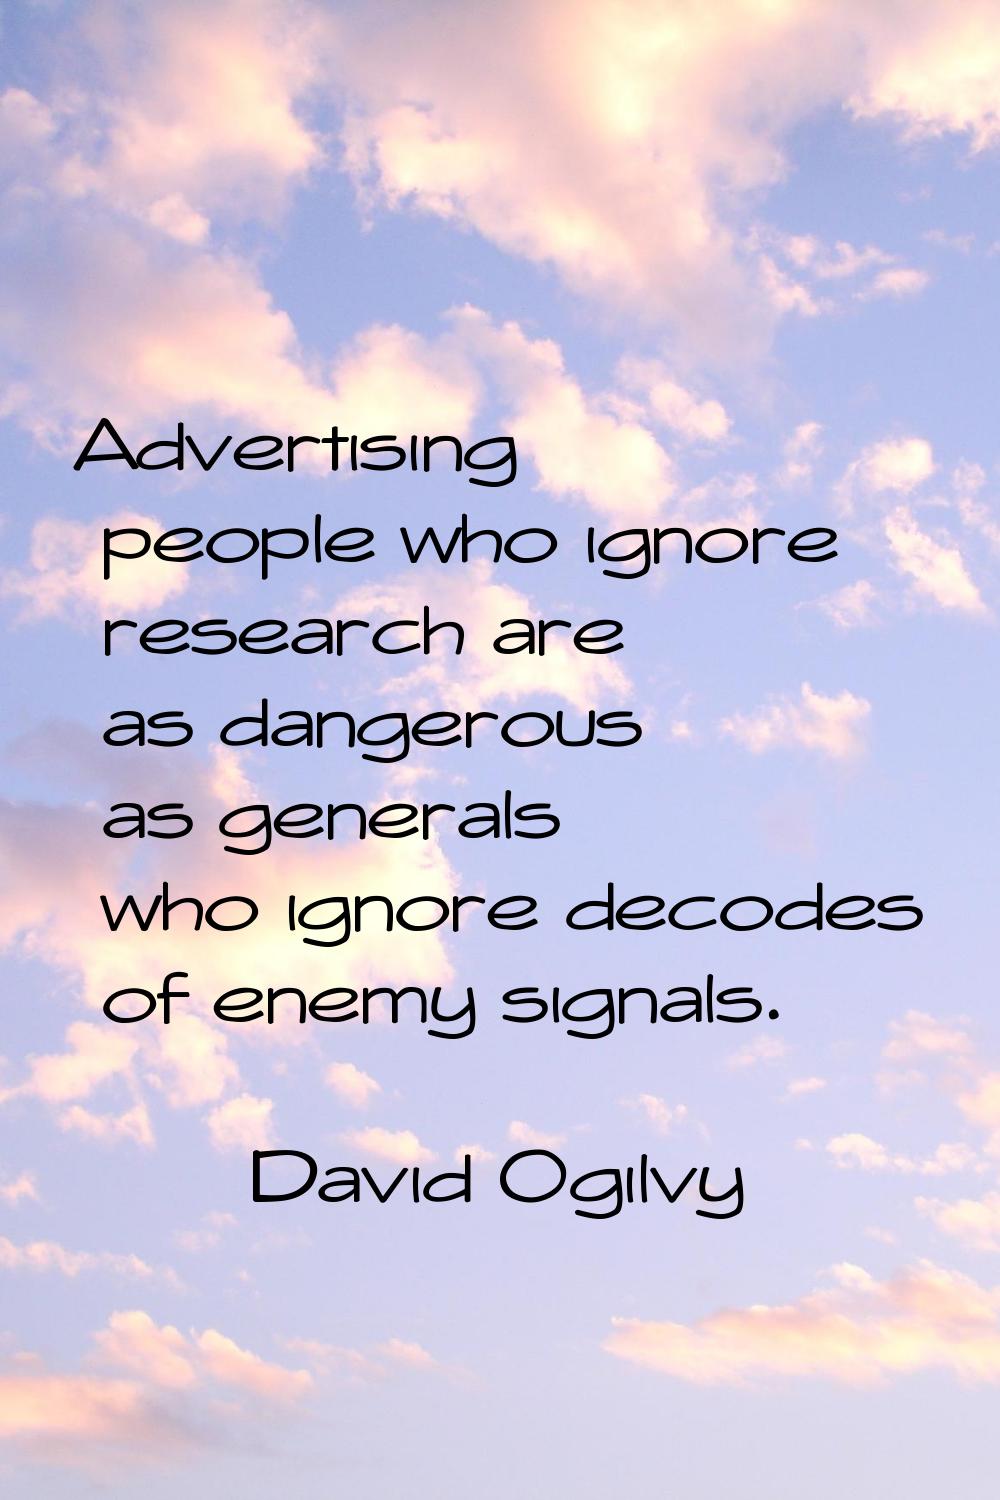 Advertising people who ignore research are as dangerous as generals who ignore decodes of enemy sig